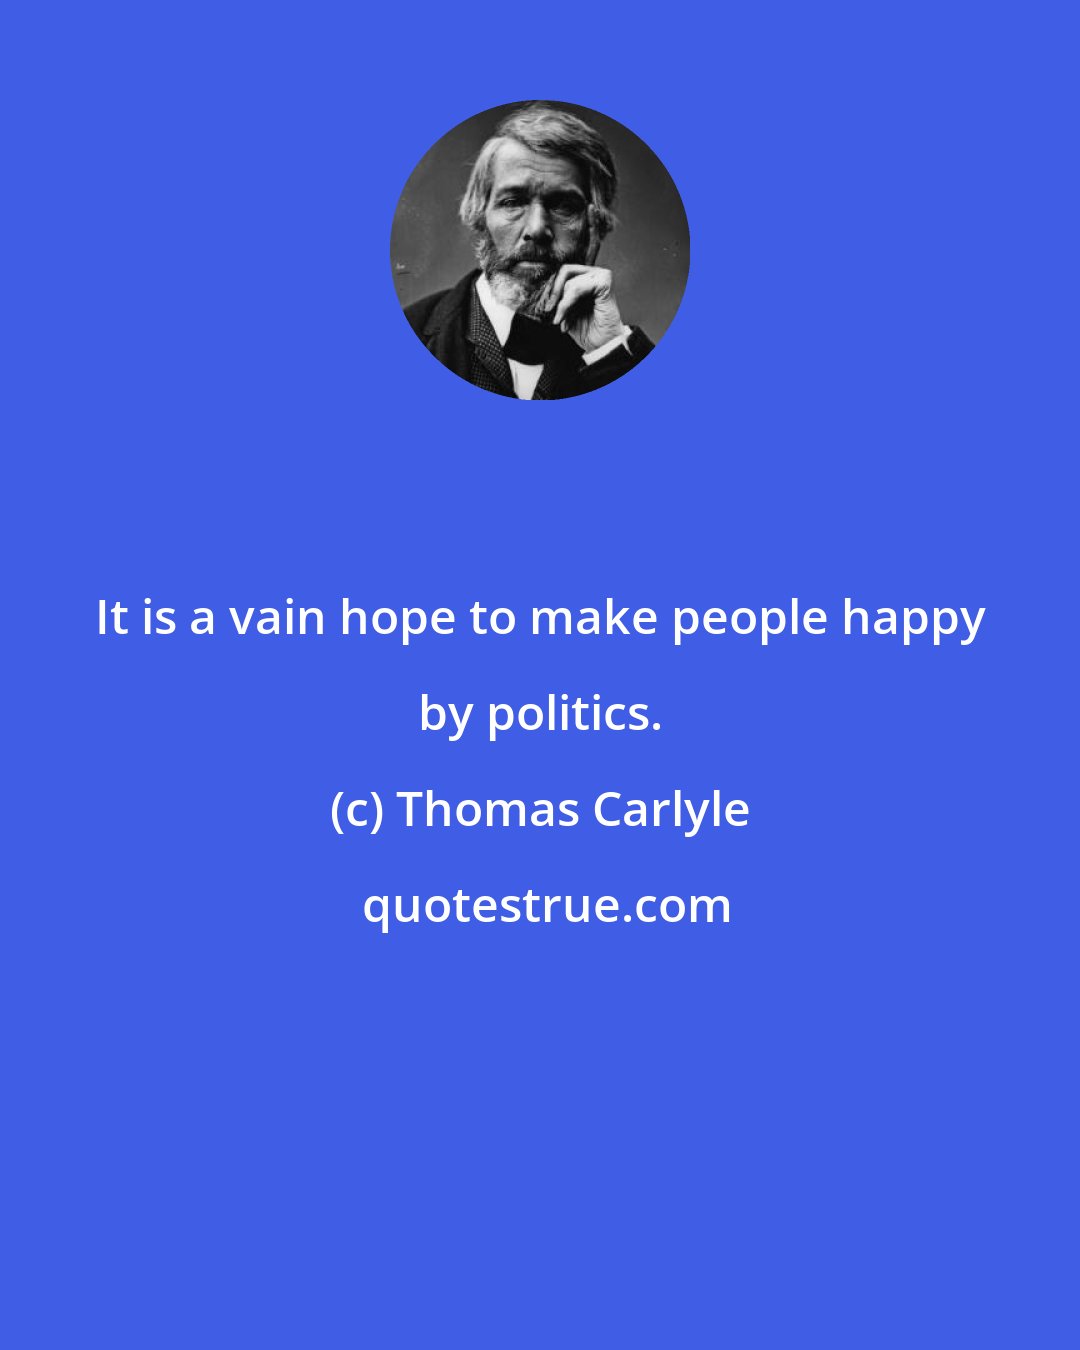 Thomas Carlyle: It is a vain hope to make people happy by politics.